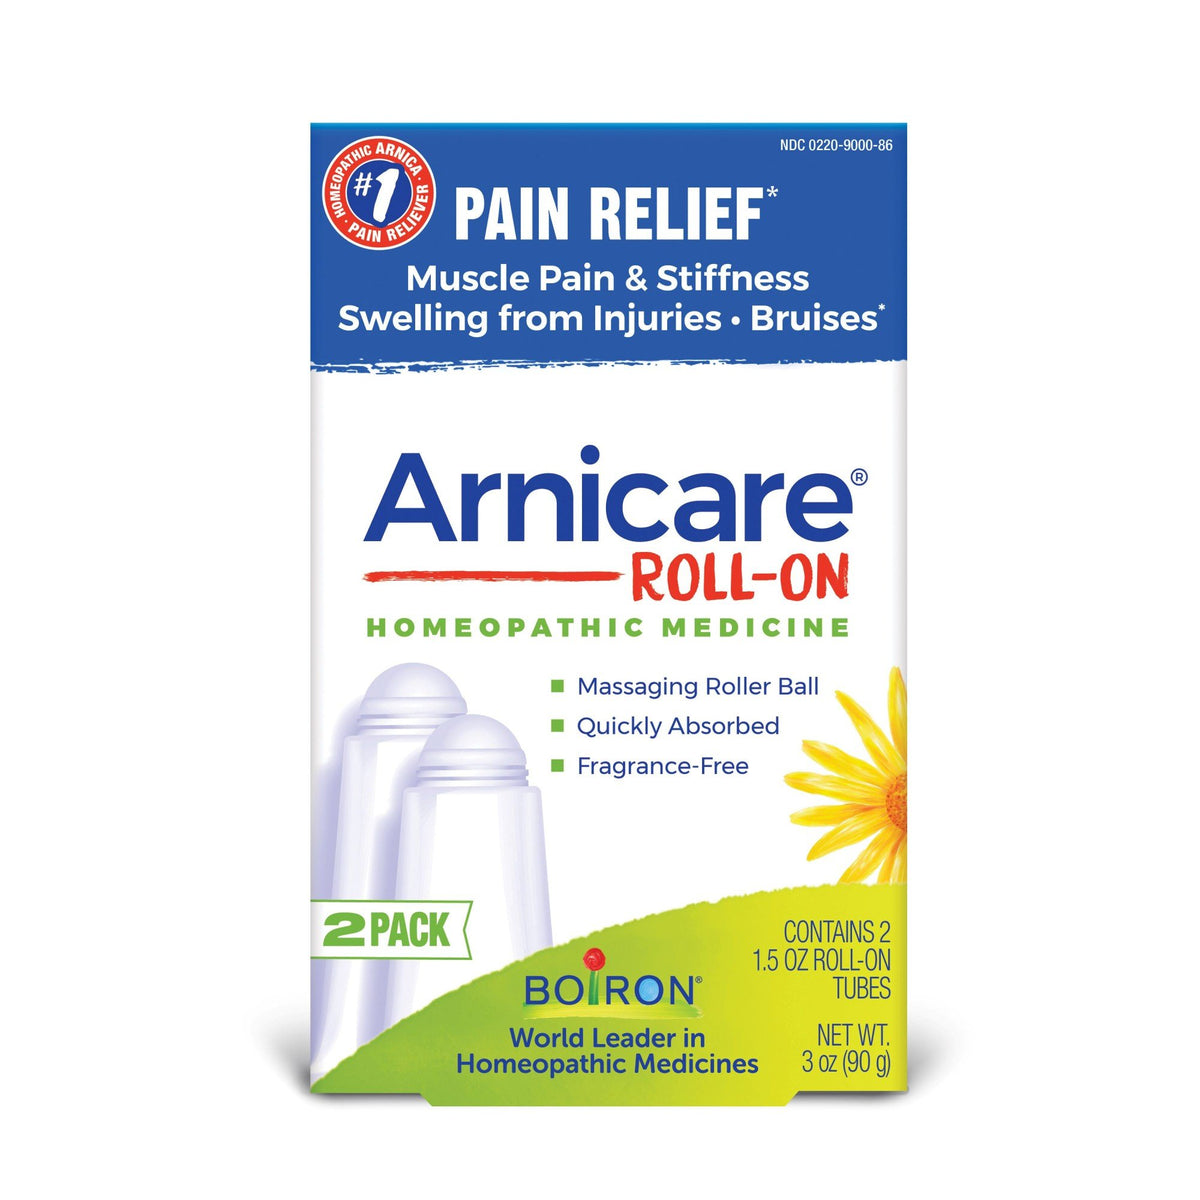 Boiron Arnicare Roll-on Twin Pack Homeopathic Medicine For Pain Relief 2 (1.5 oz) Roll-on